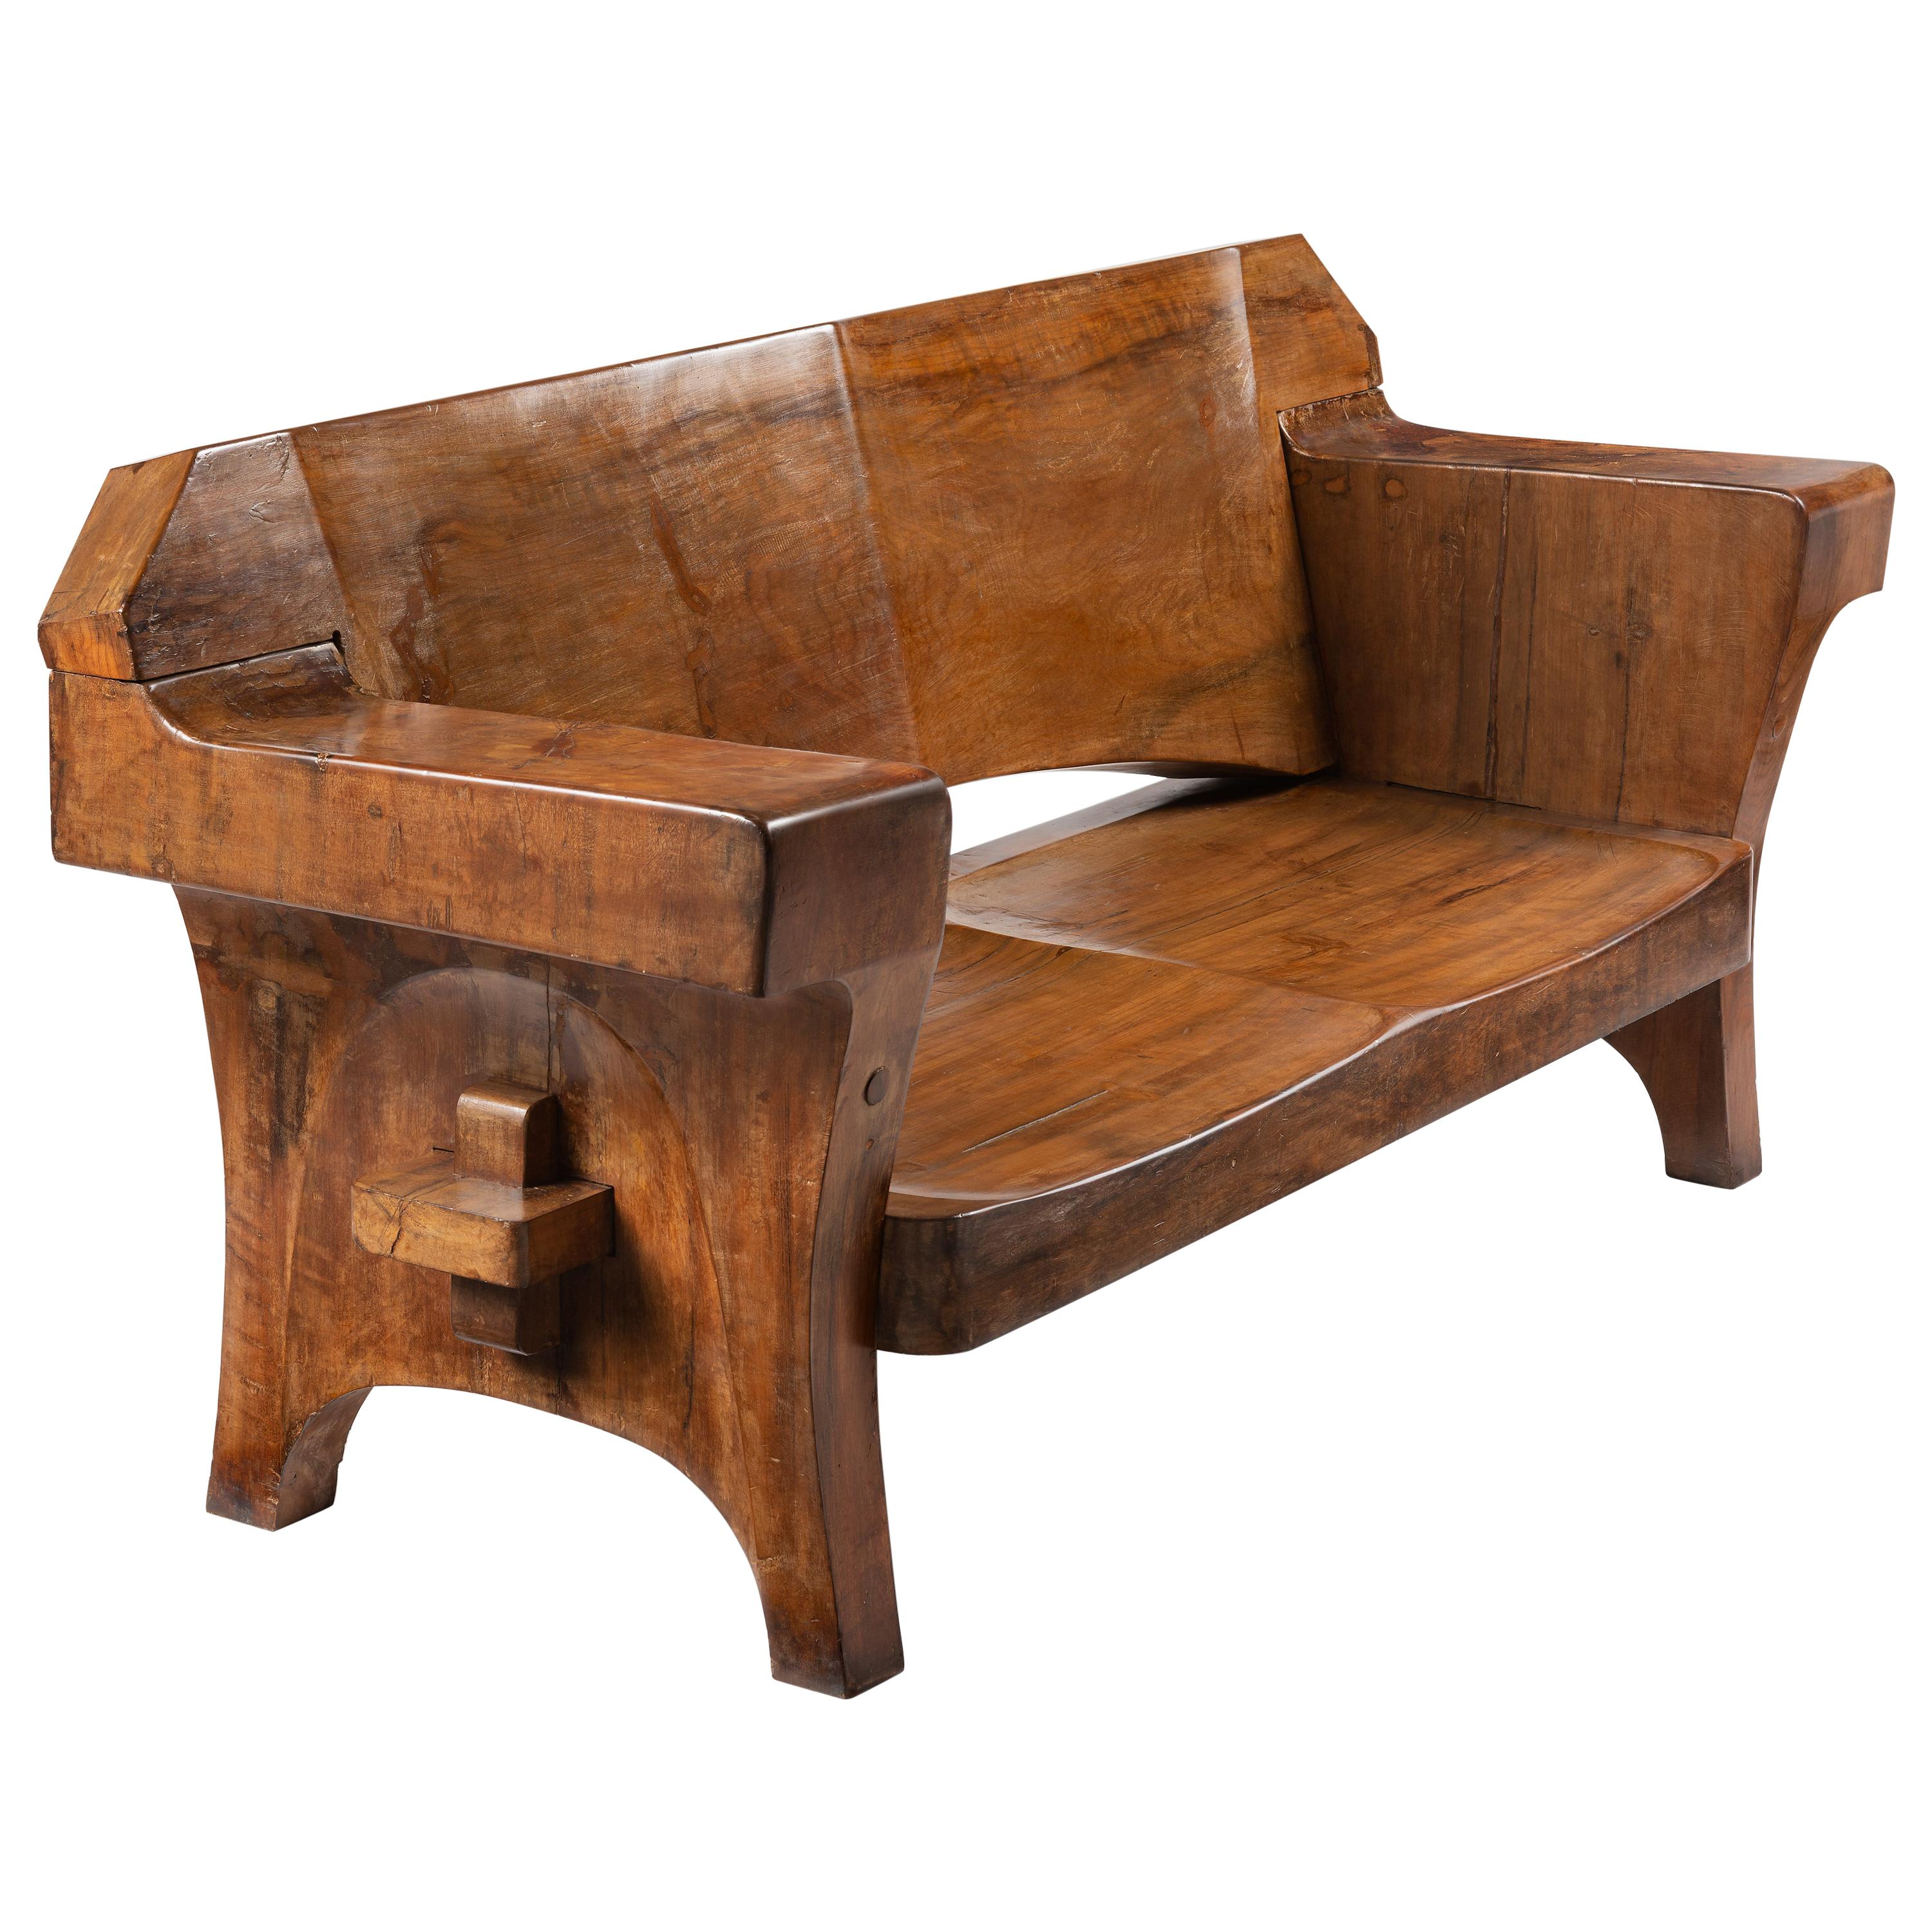 Sculptural Solid Wood and Handcrafted Sofa by Jose Zanine Caldas, circa 1980 For Sale